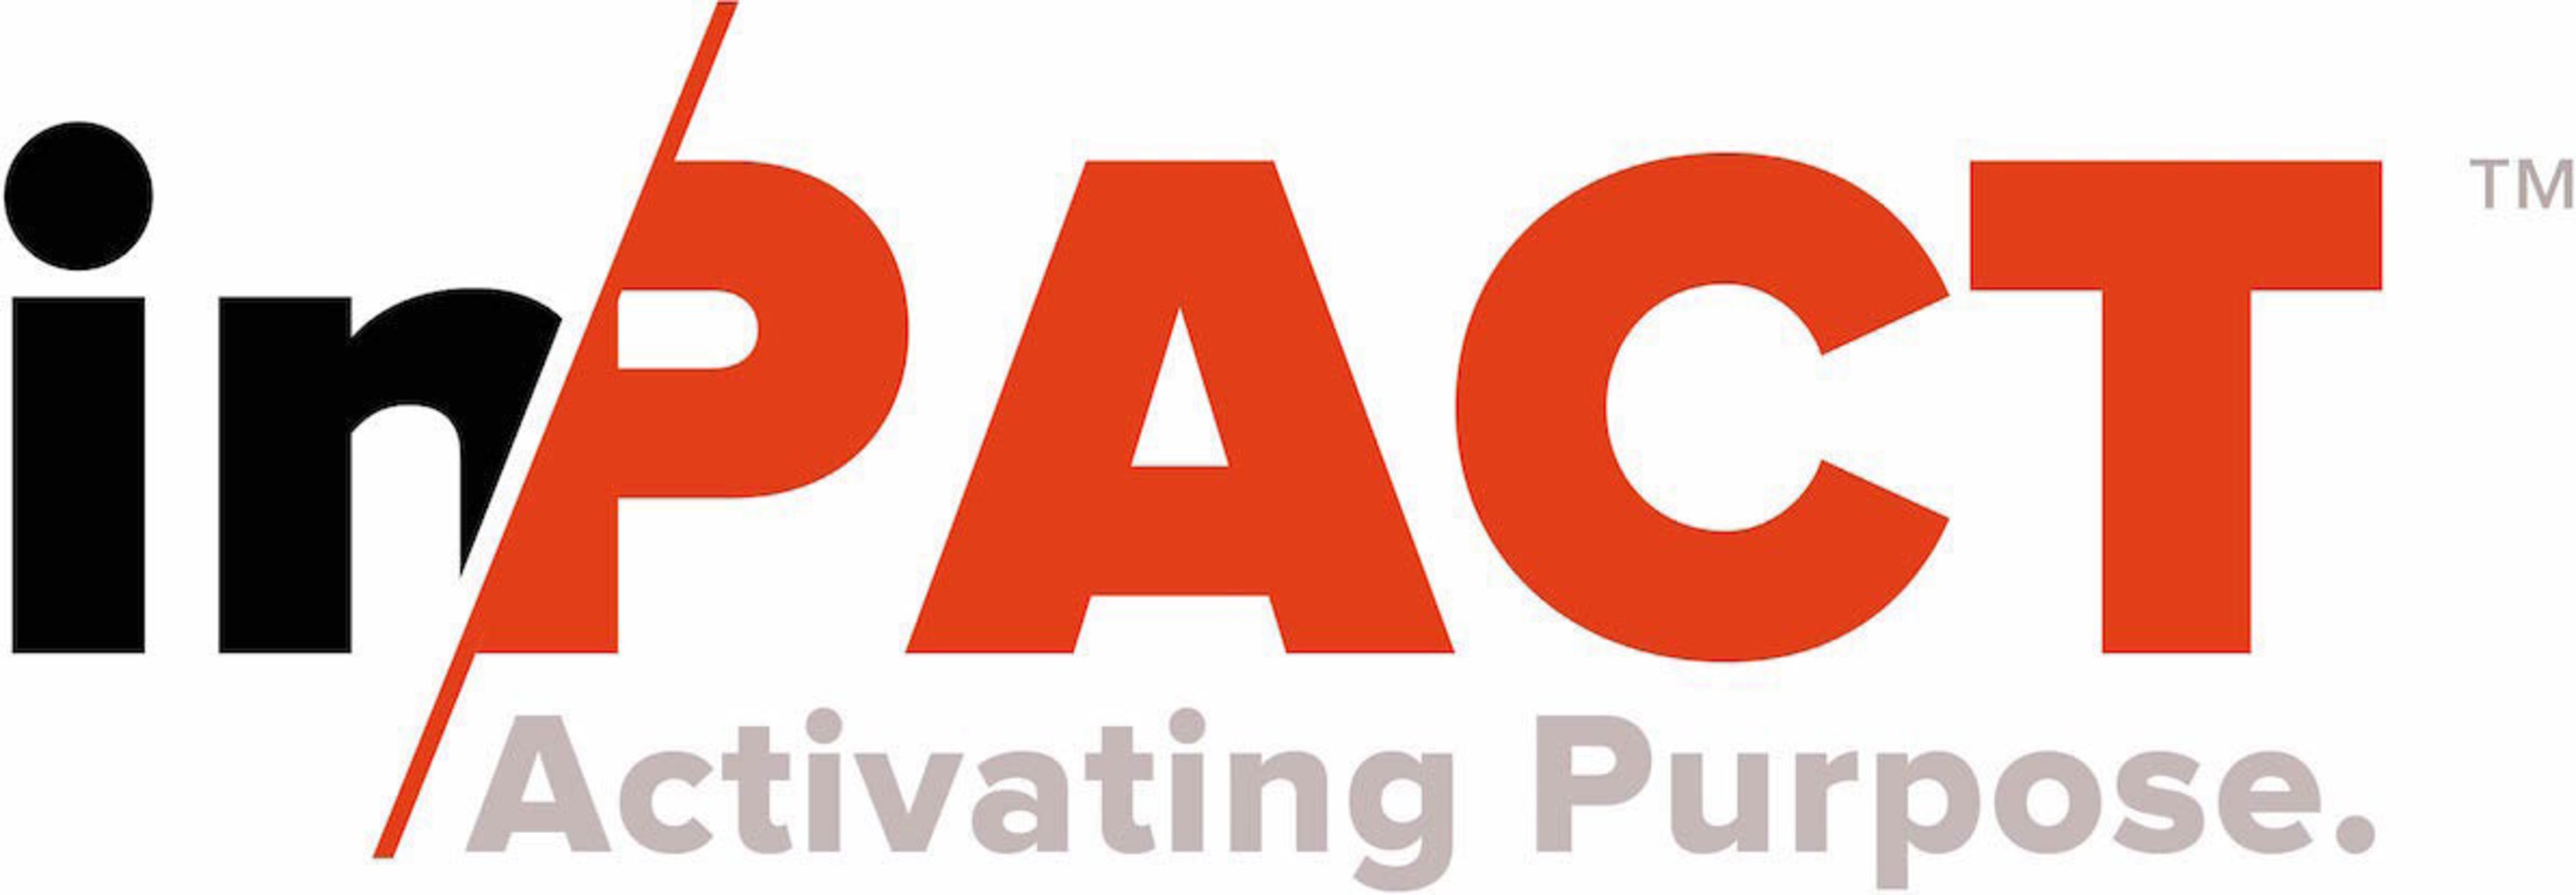 in/PACT has introduced the world's only global purpose activation platform that connects brands to their customers, employees and other stakeholders through "people empowered giving." (PRNewsFoto/in/PACT)